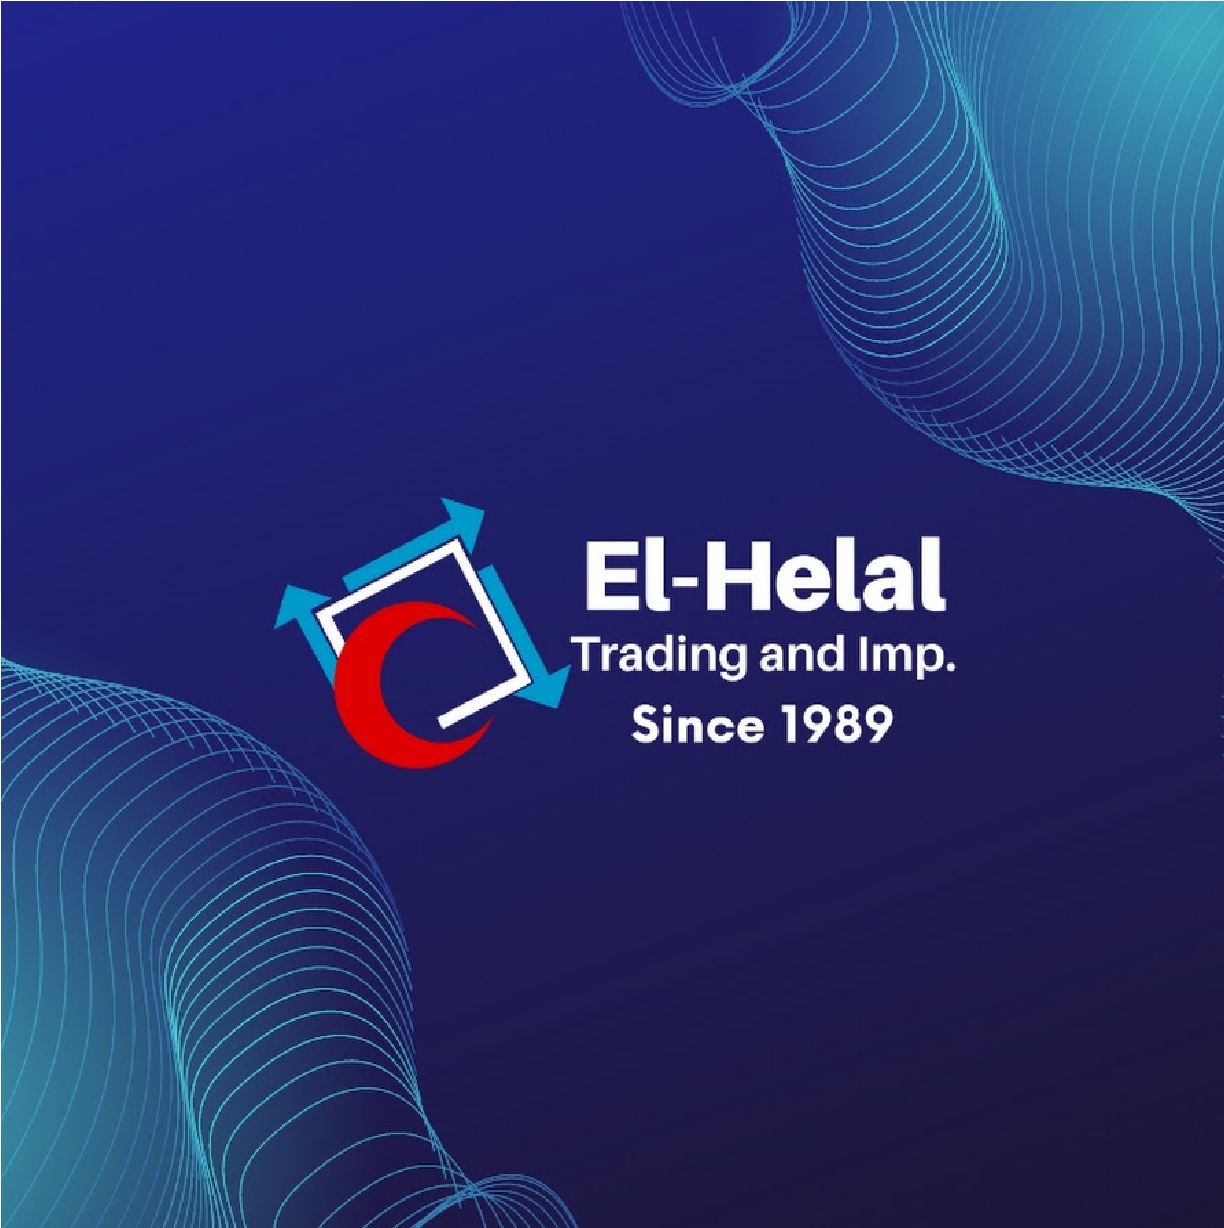 El-Helal Trading and Importing